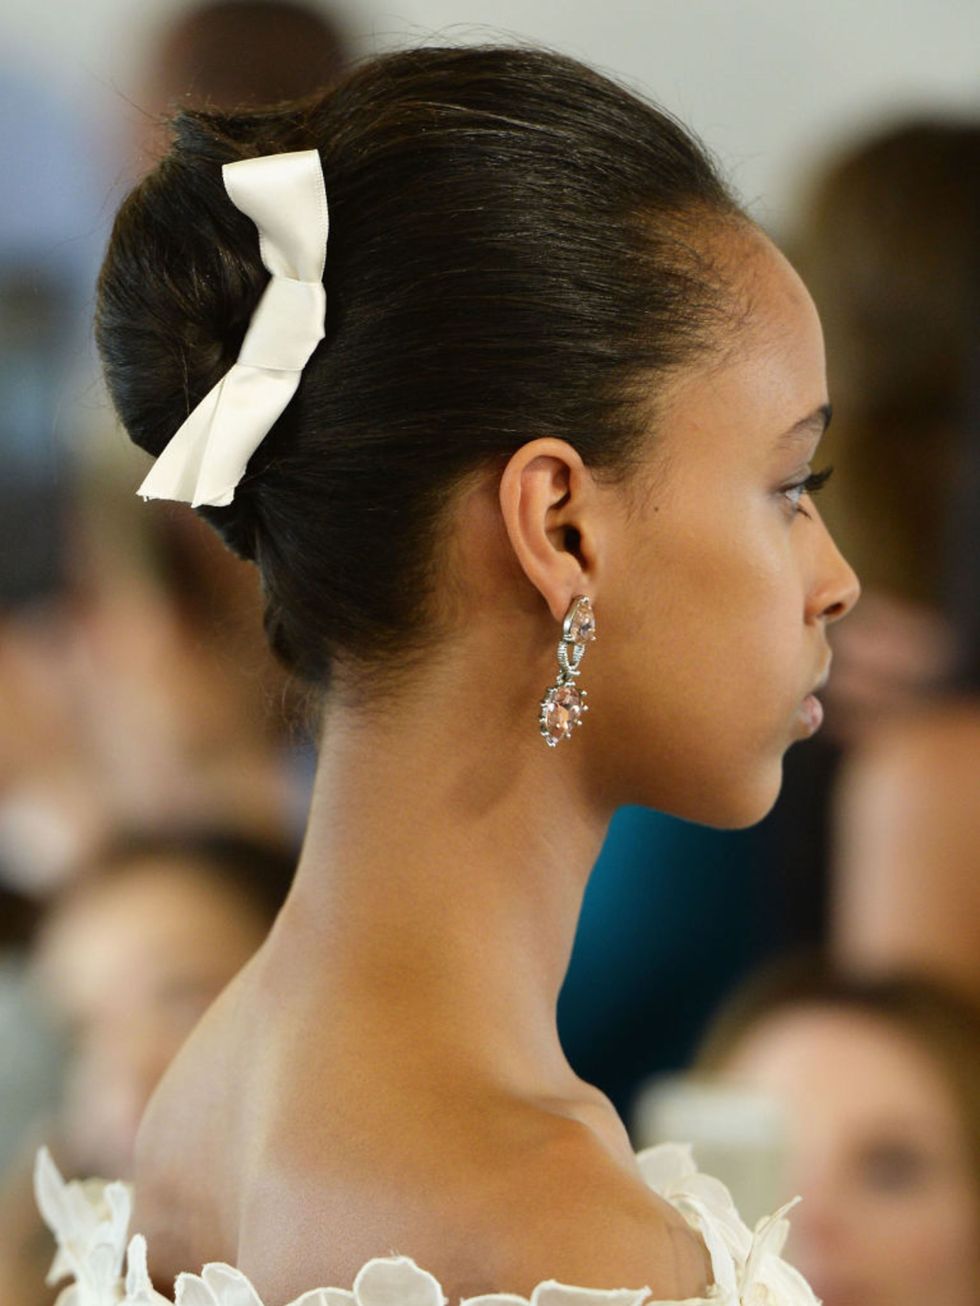 Another Oscar de le Renta model wore hers with a super-chic bow accessory  dare we say, a handy way to conceal bobby pins